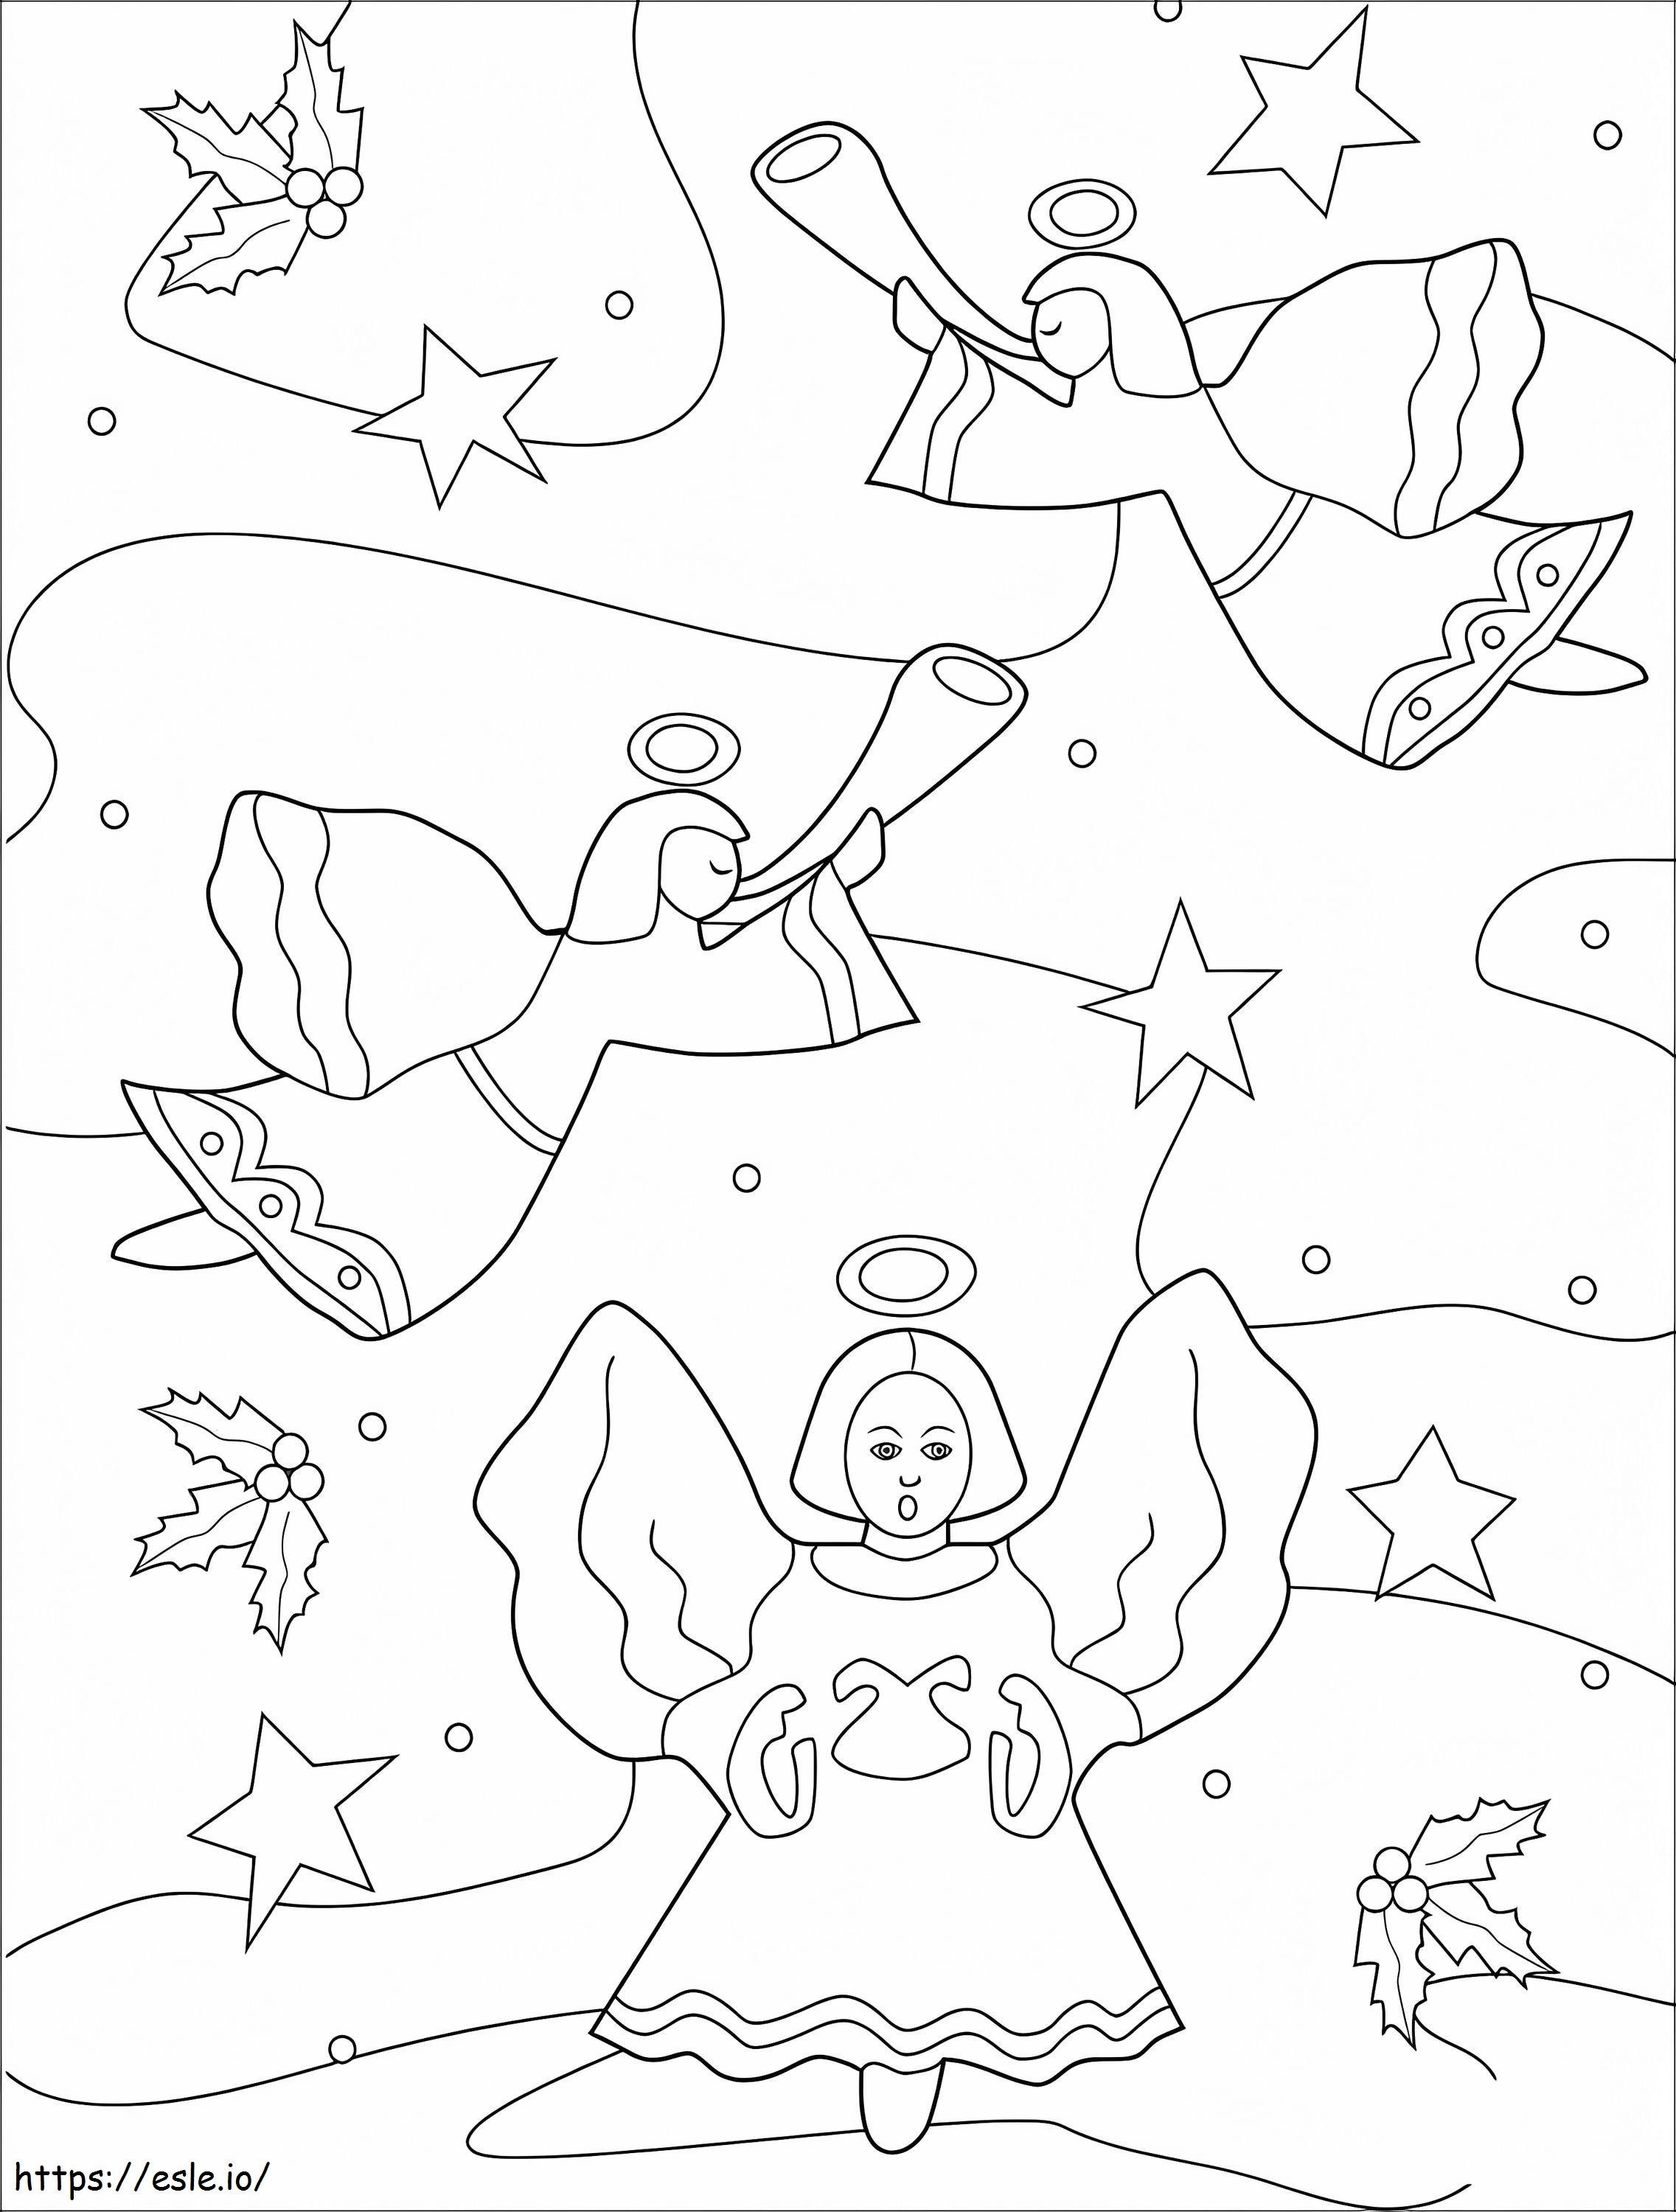 Three Christmas Angels coloring page